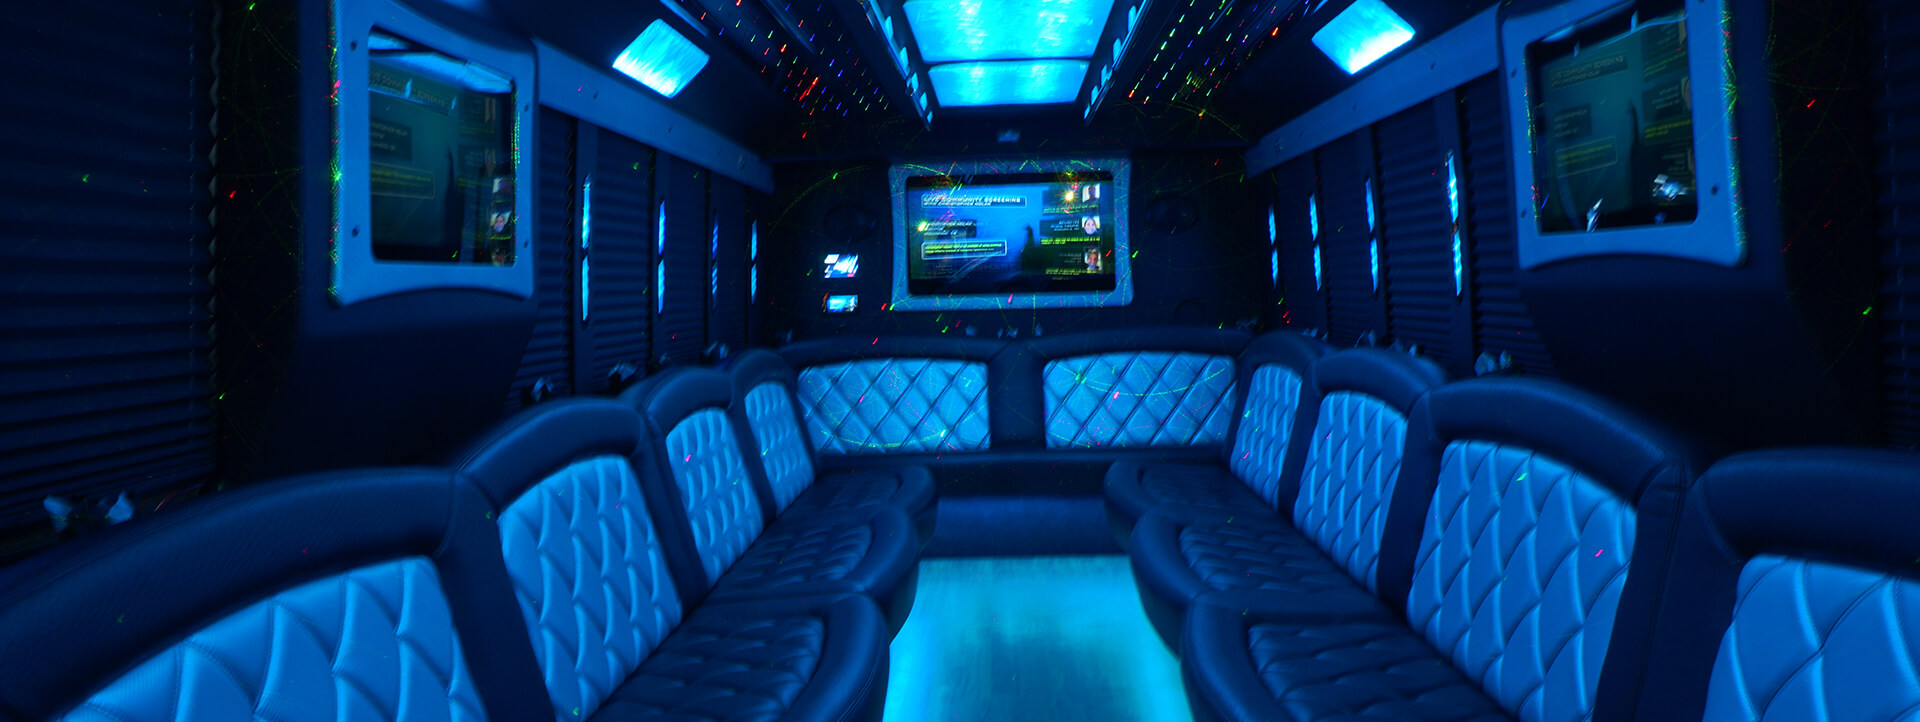 party buses interior design